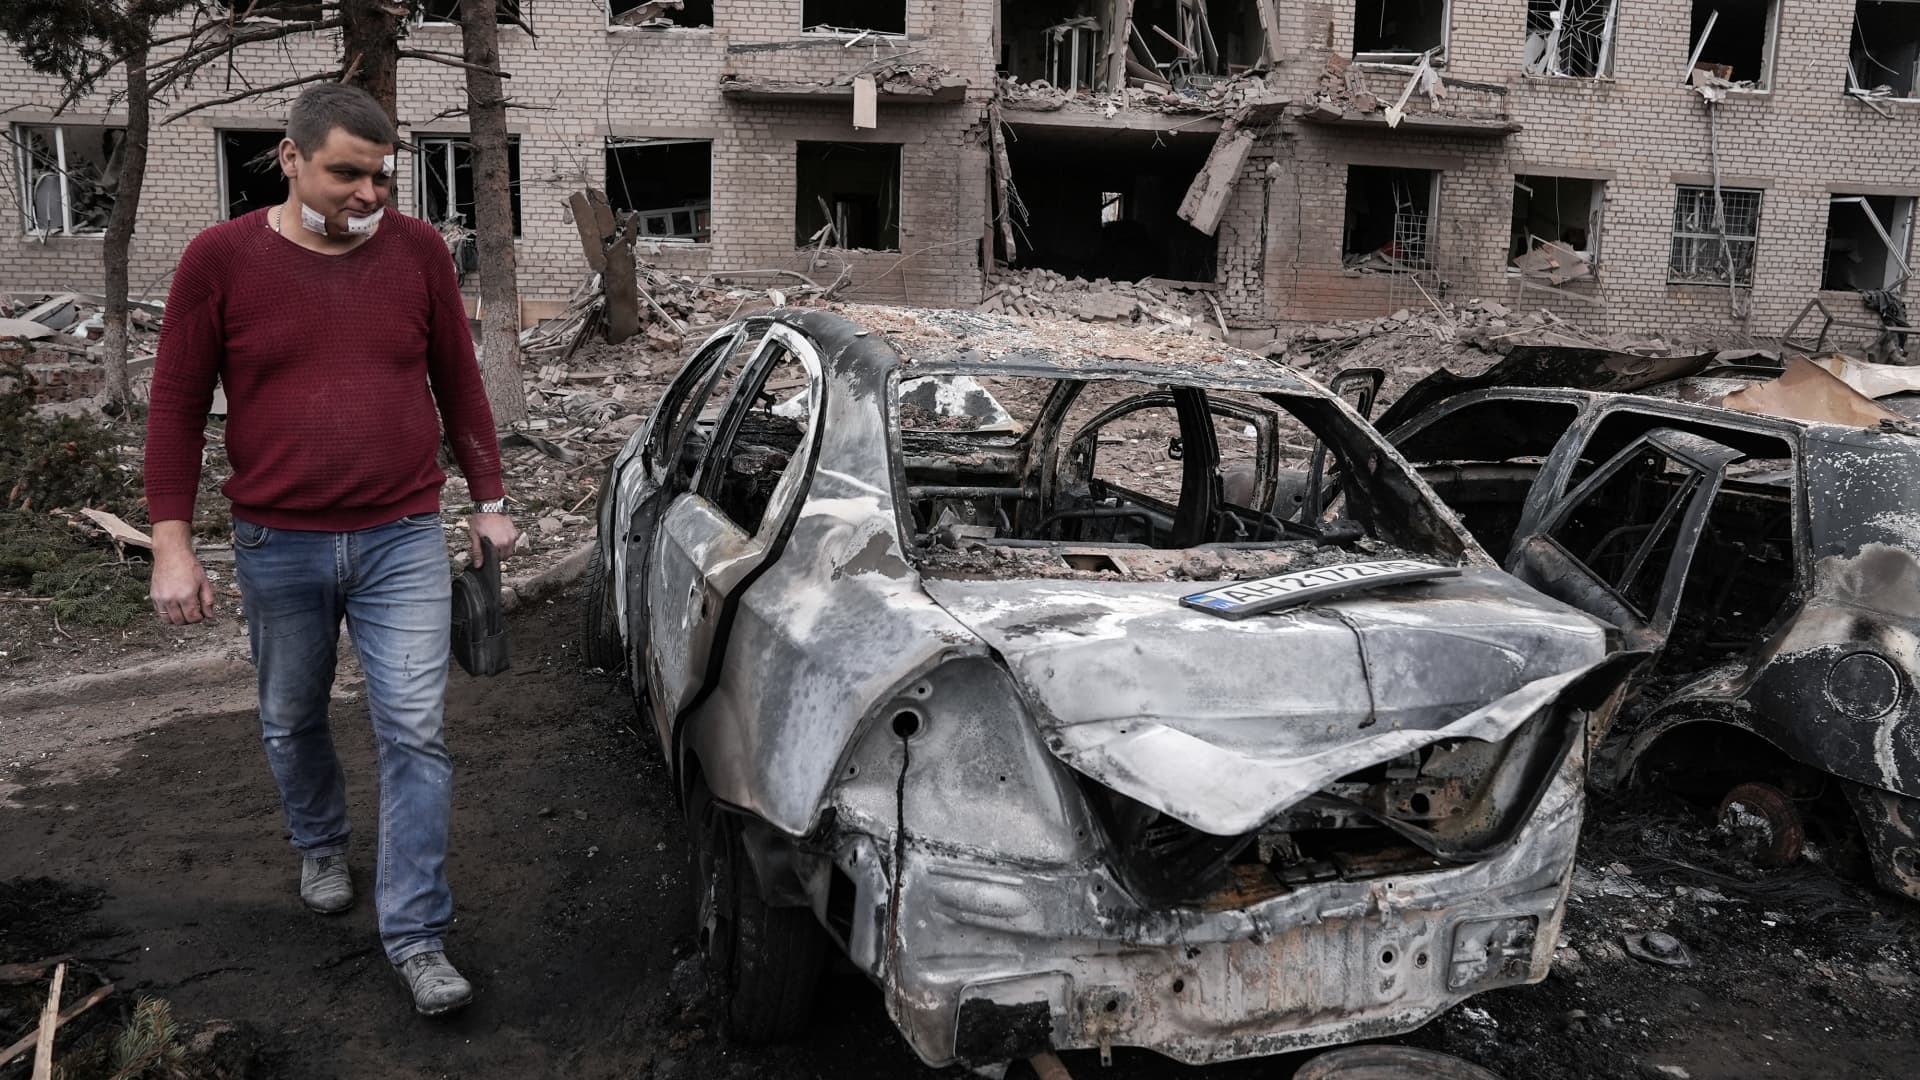 EDITORS NOTE: Image contains graphic content: A wounded man walks near burnt cars in front of a destroyed building in the city centre on March 27, 2023 in Sloviansk, Ukraine. 